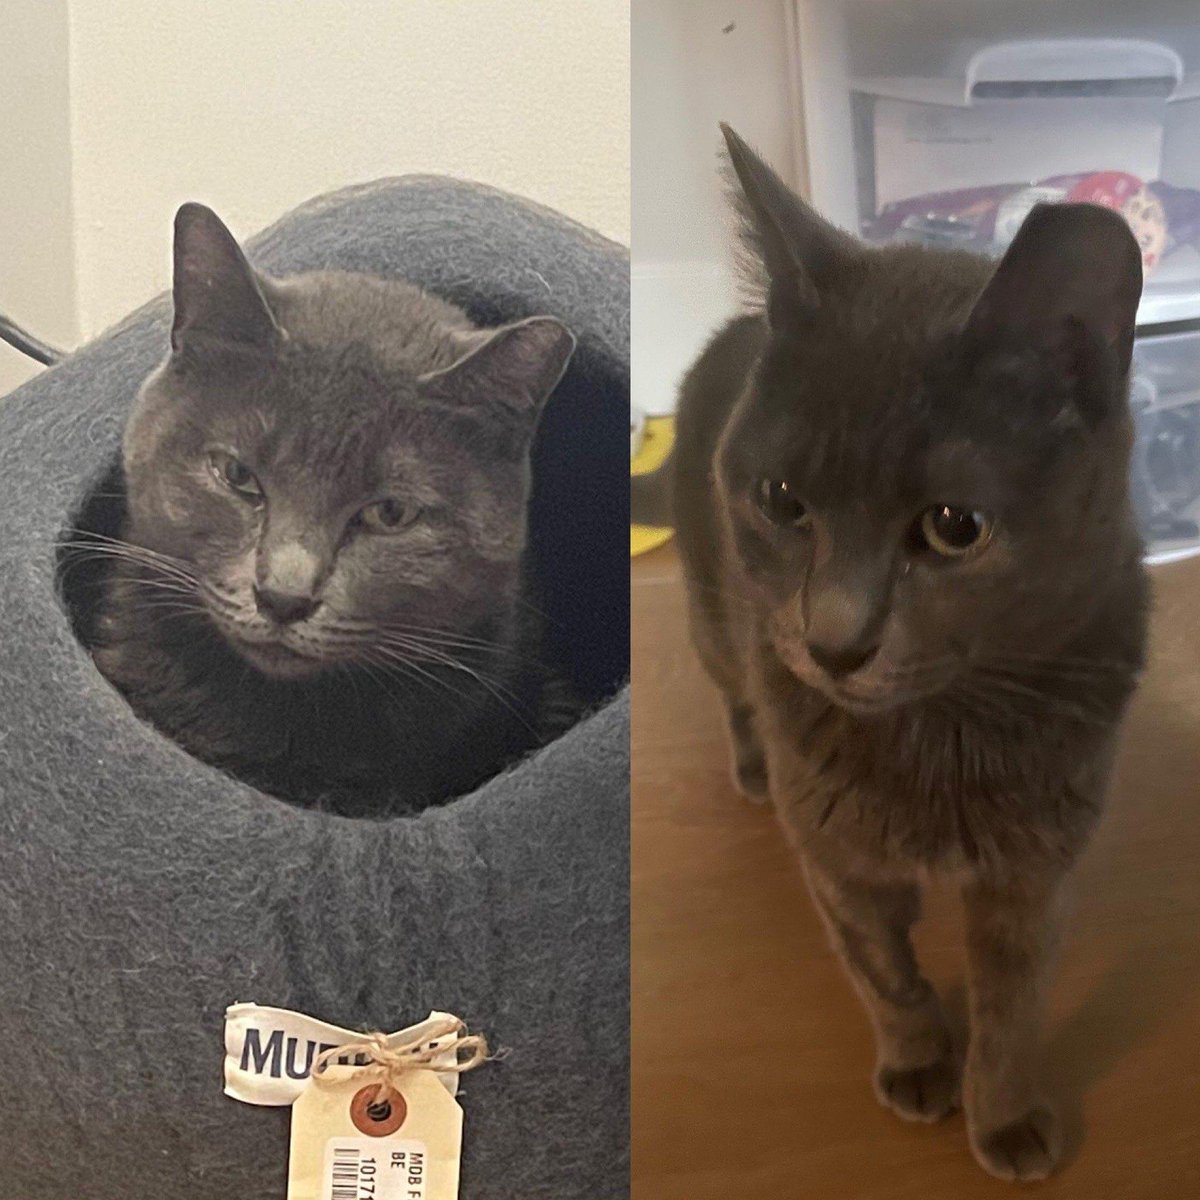 Indigo ❄️: My new cat, Nyx! Photos are before and after being introduced to QQL 😉